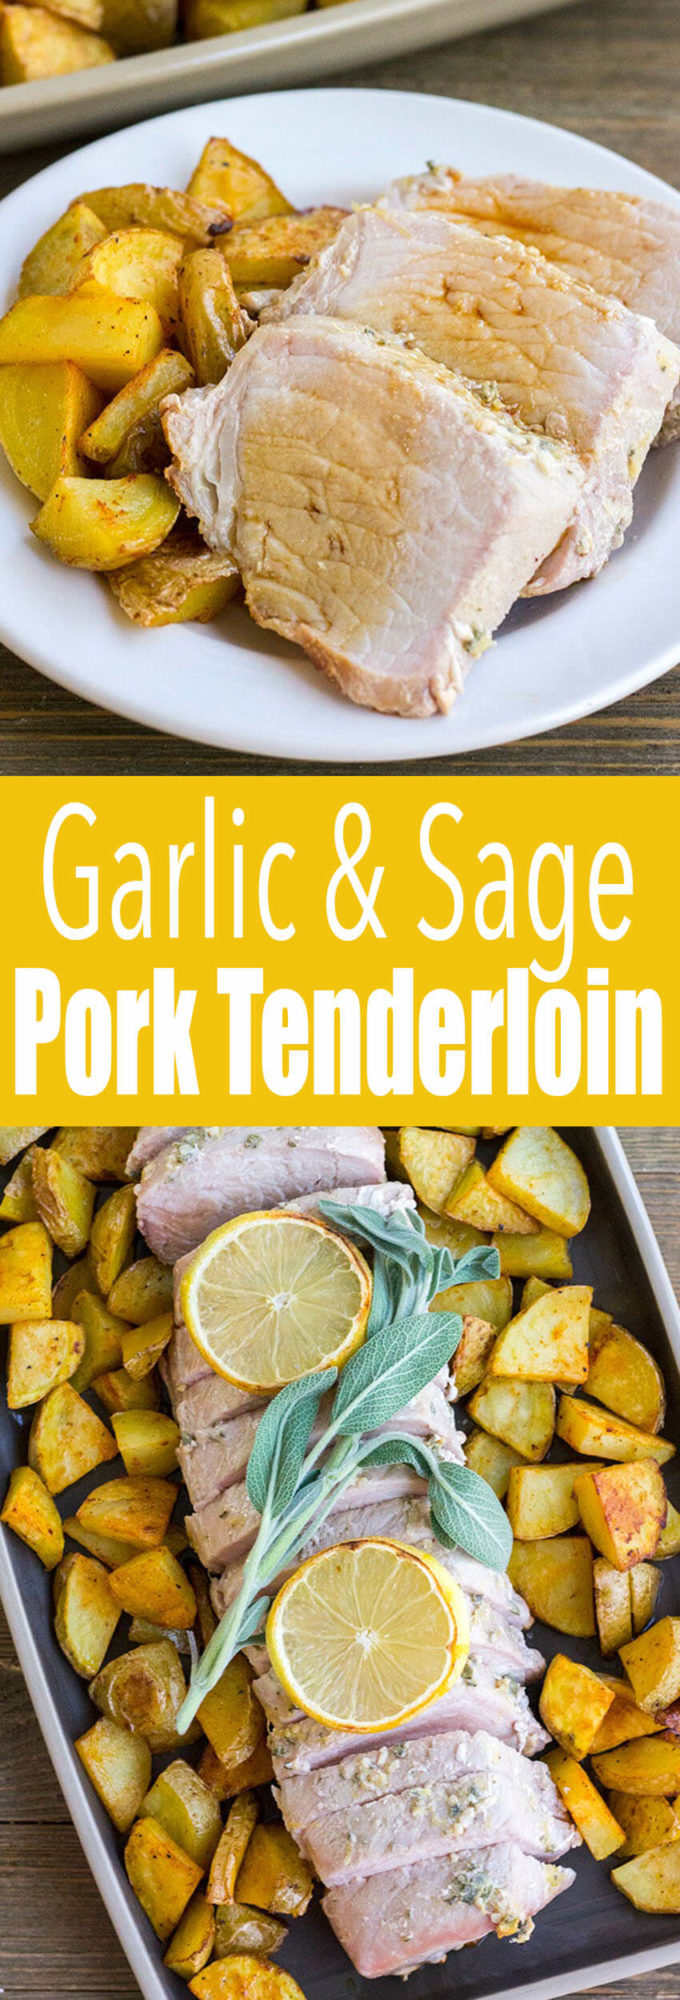 Garlic and Sage Rubbed Pork Tenderloin: This Pork Tenderloin recipe is an easy 30-minute dinner that's great for busy weeknights, but it's special enough for an intimate holiday meal too!